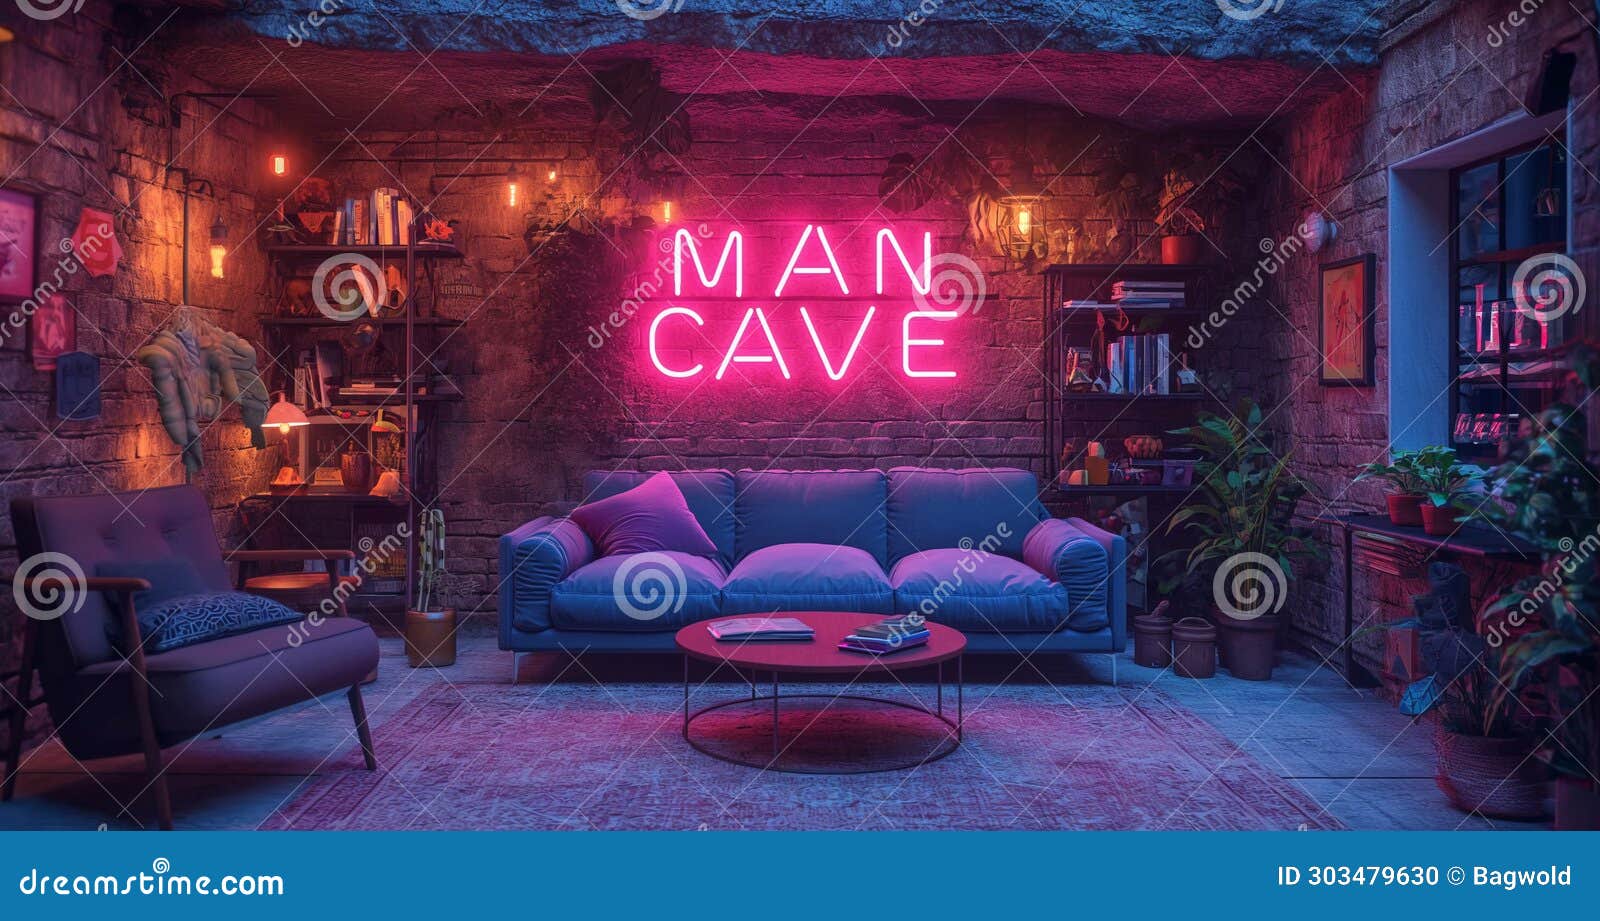 man cave neon sign  in a dark man cave